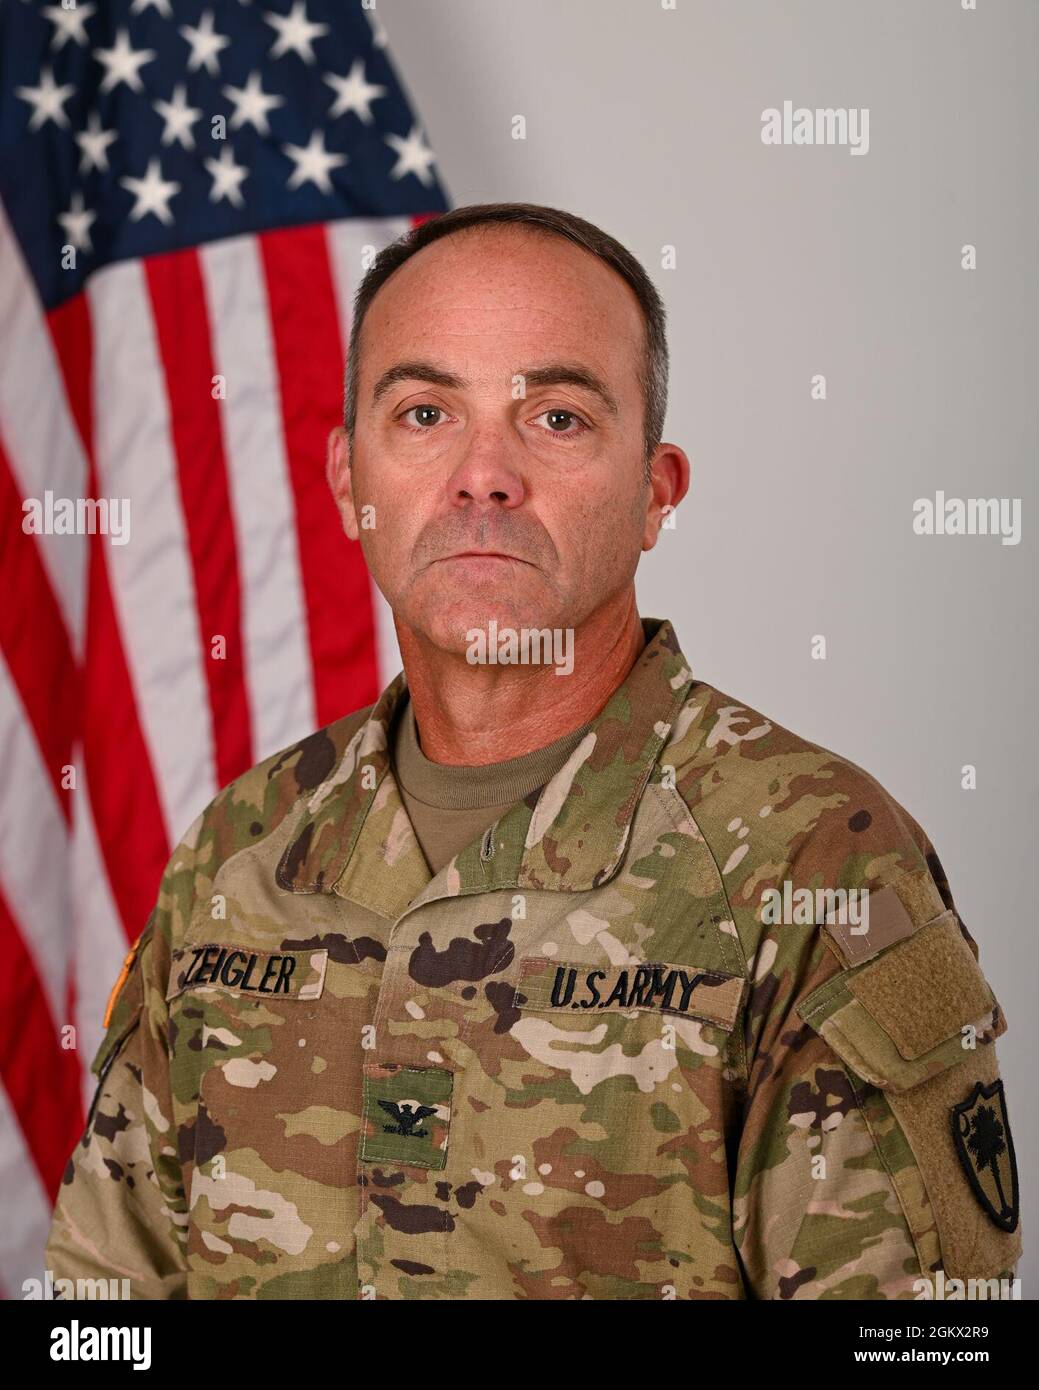 The South Carolina National Guard announces U.S Army Col. Richard Zeigler, III as the next commander of the 218th Regional Training Institute in Eastover, South Carolina. Stock Photo